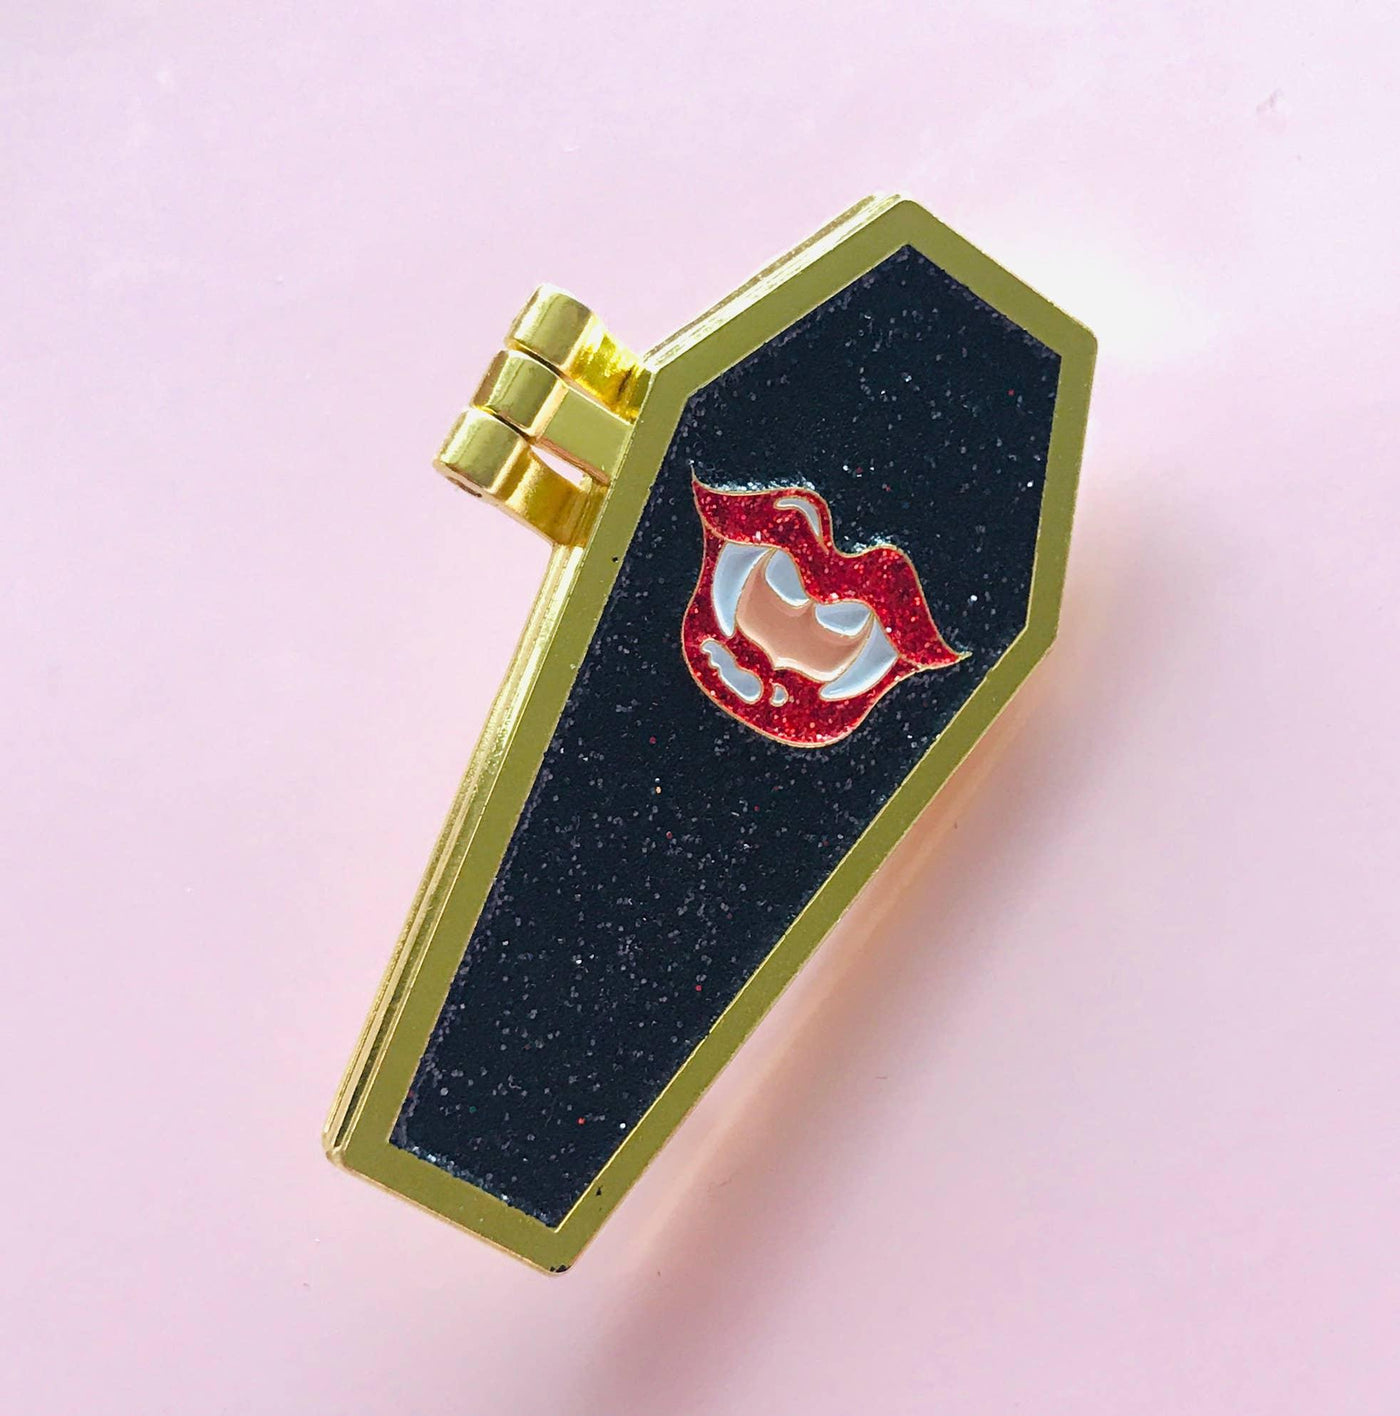 The Vamp | Soft Enamel Pin with Glitter! - Kitschy Delish - The Sock Monster